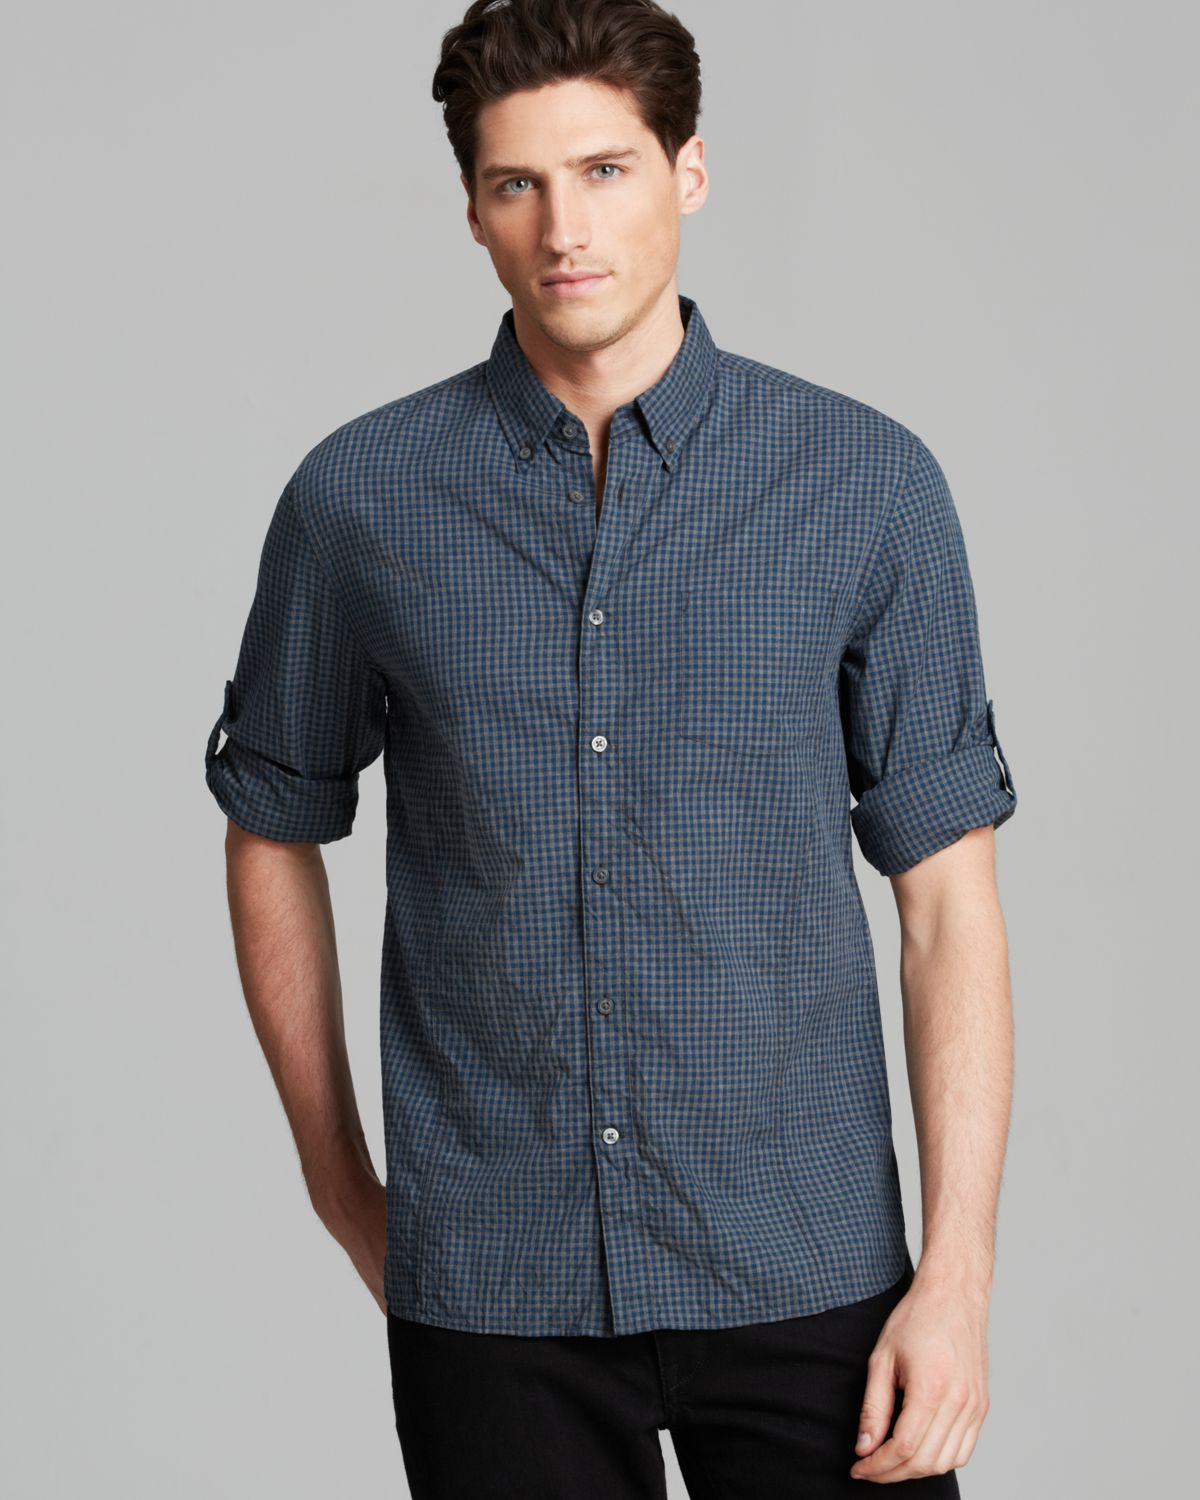 Lyst - John Varvatos Usa Roll Up Sleeve Button Down Shirt - Slim Fit in ...